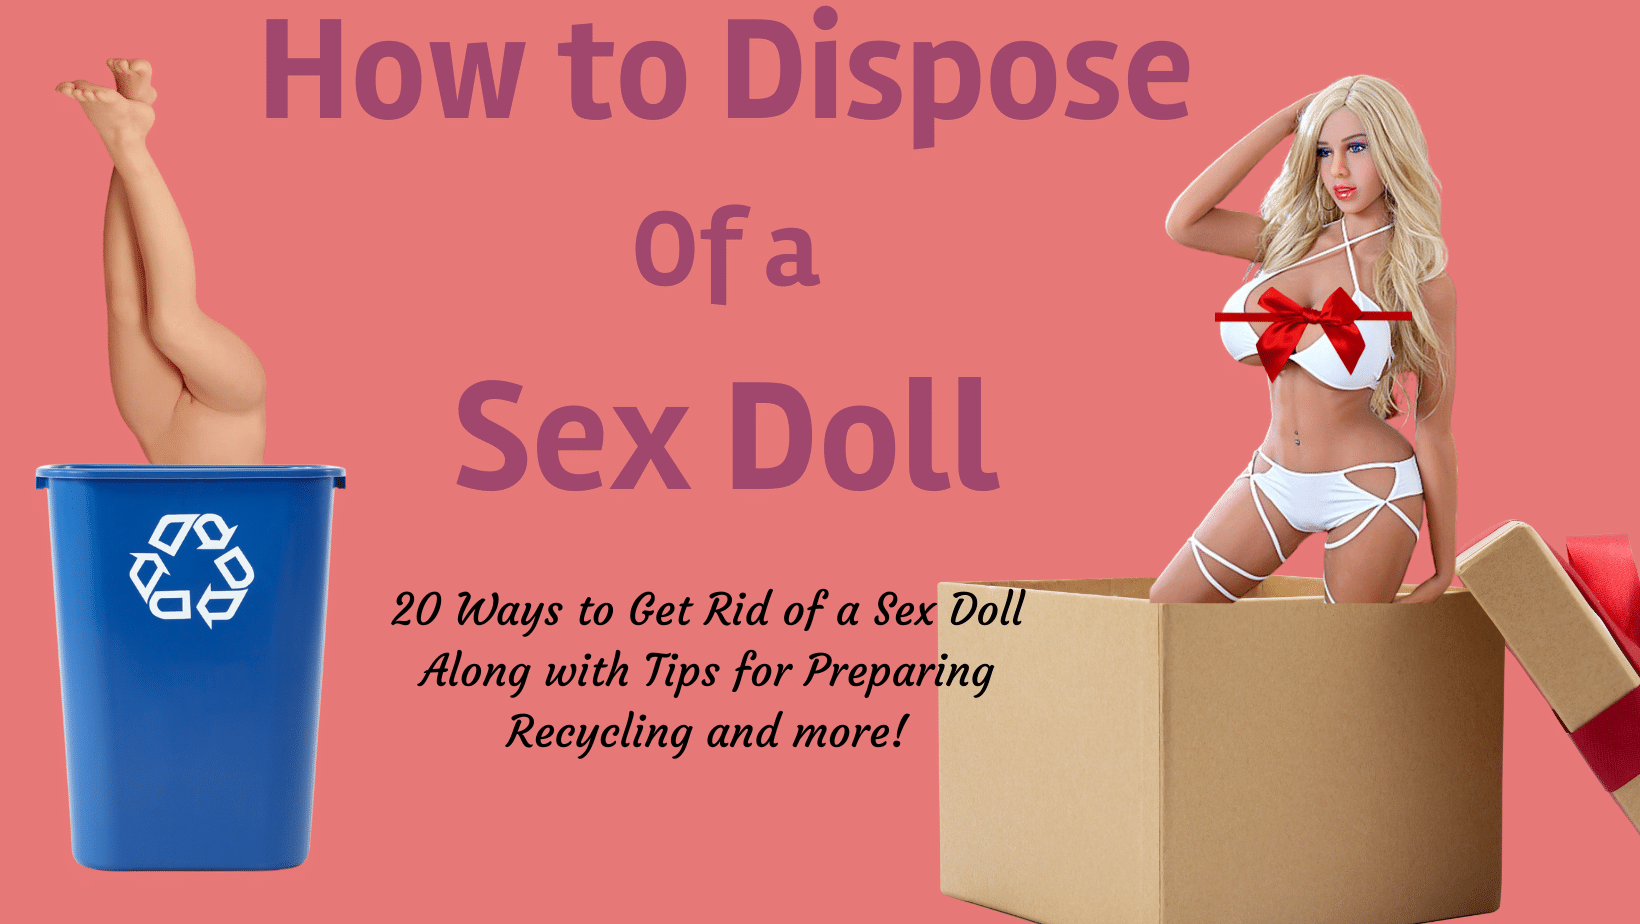 How to Dispose of a Sex Doll